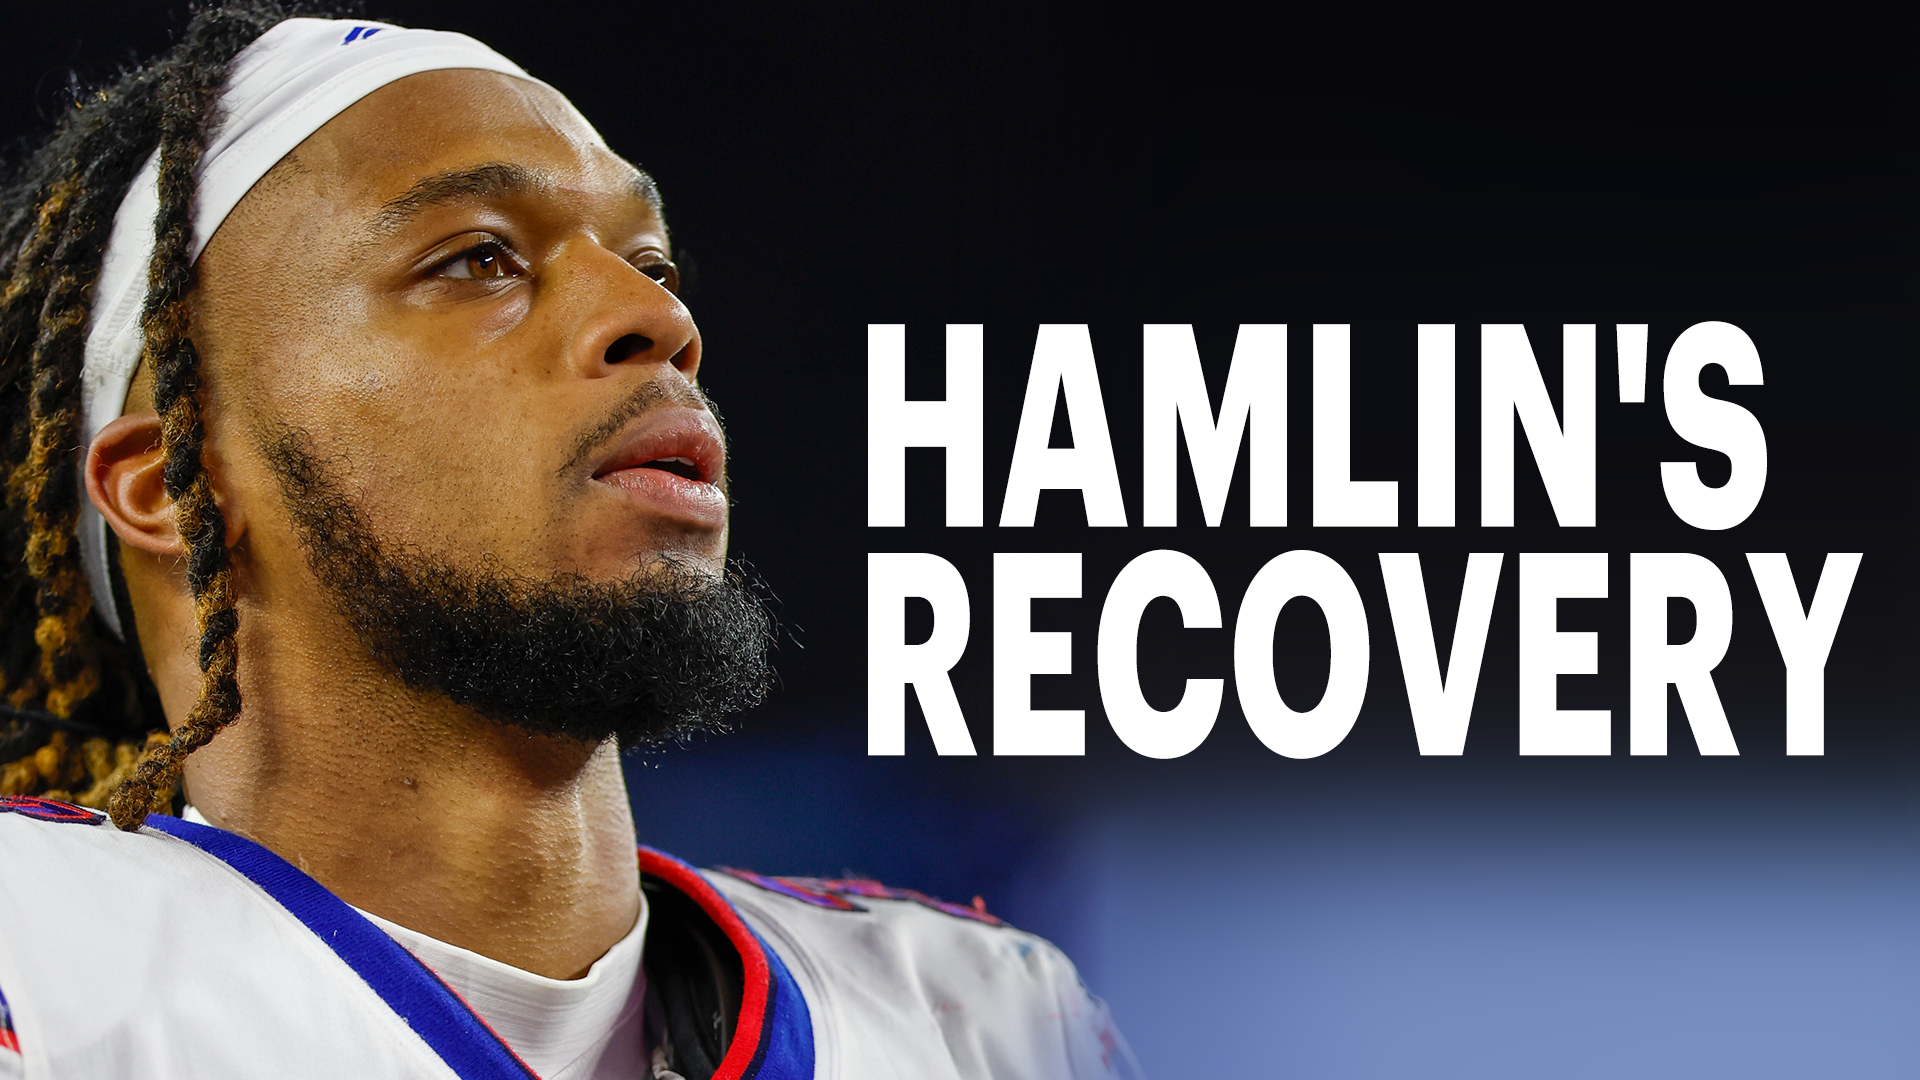 Damar Hamlin 'fully cleared' to resume playing, general manager says